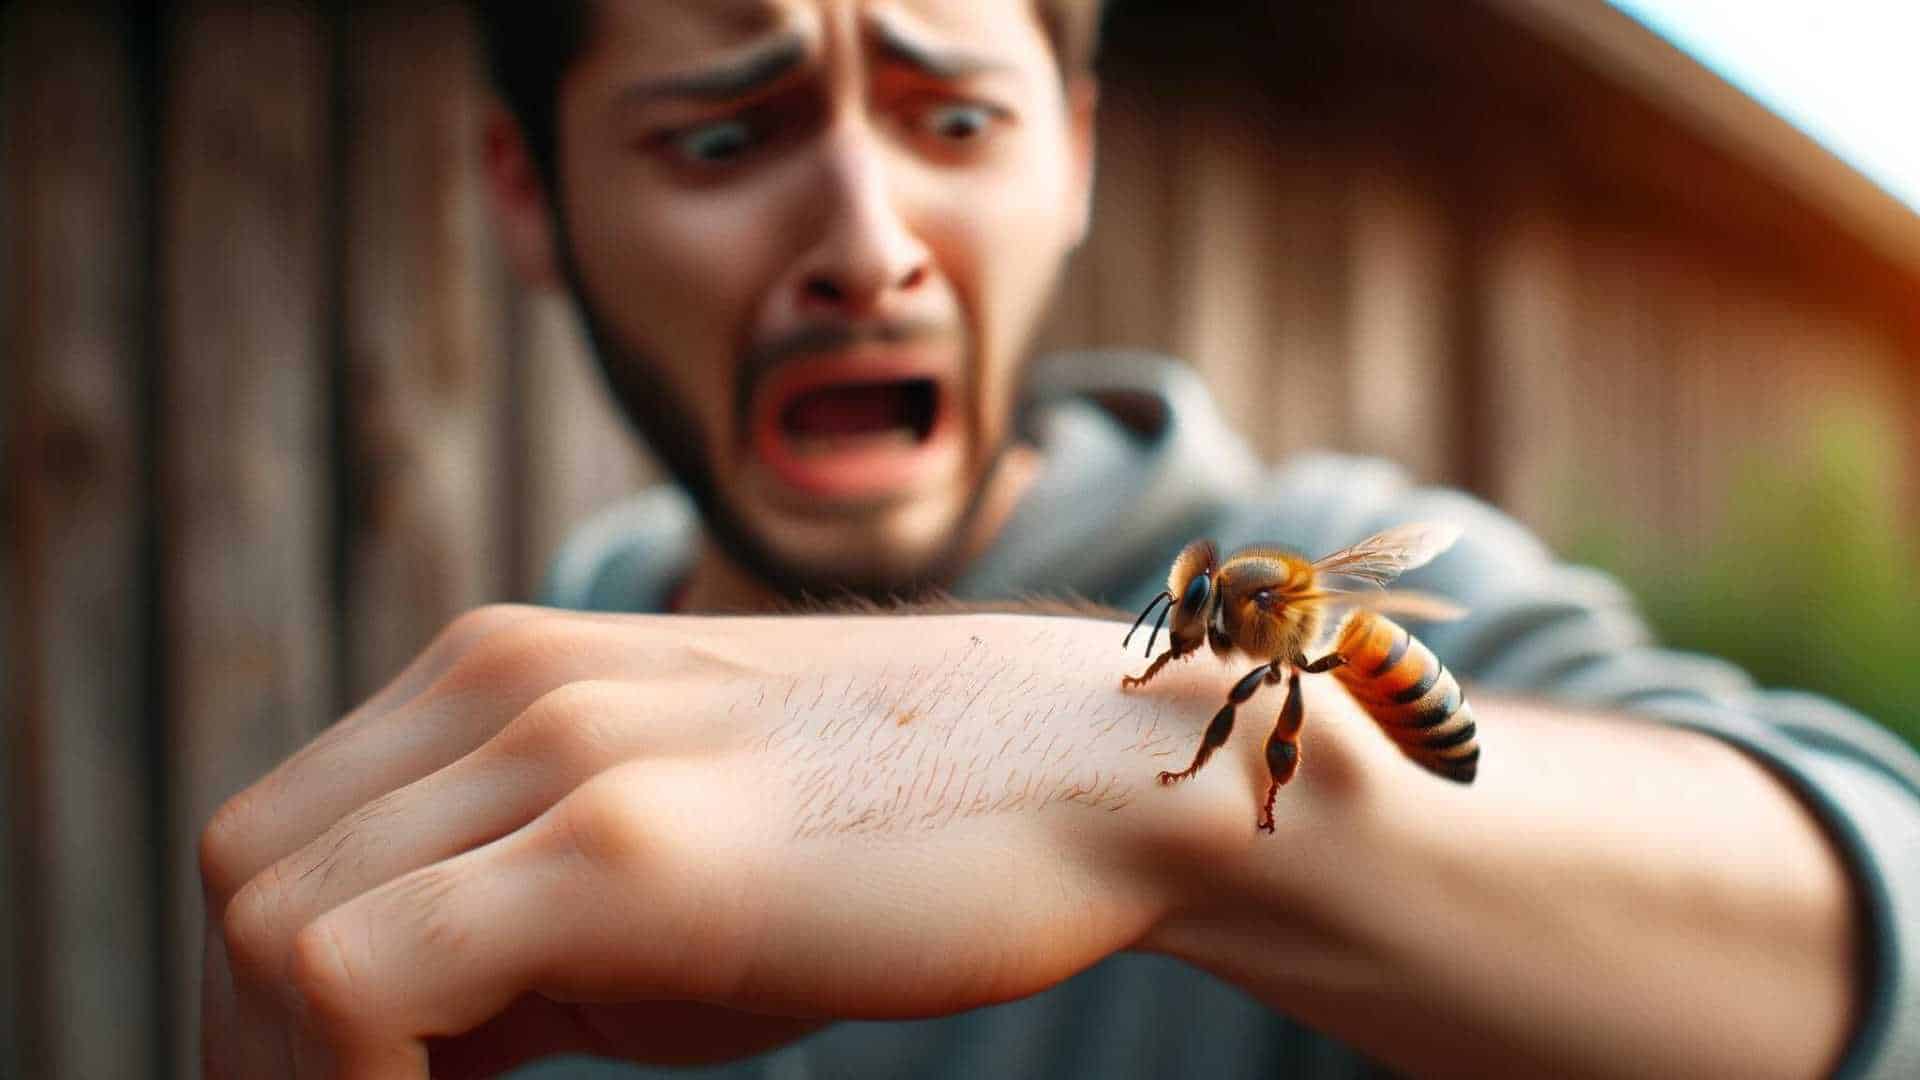 spiritual meaning of a bee sting featured image